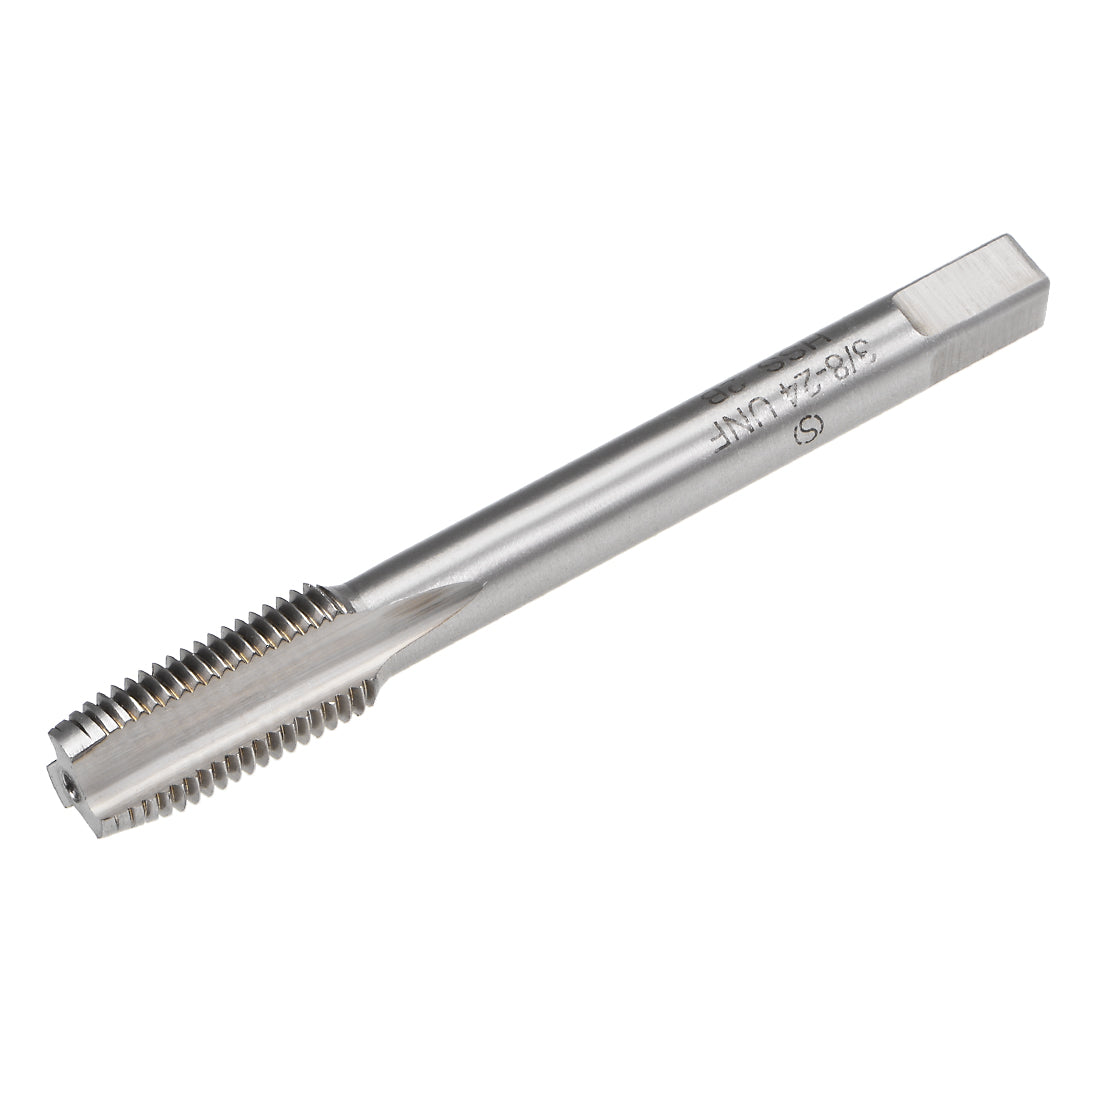 Uxcell Uxcell Machine Tap 3/8-24 UNF Thread Pitch 2B Class 3 Flutes High Speed Steel